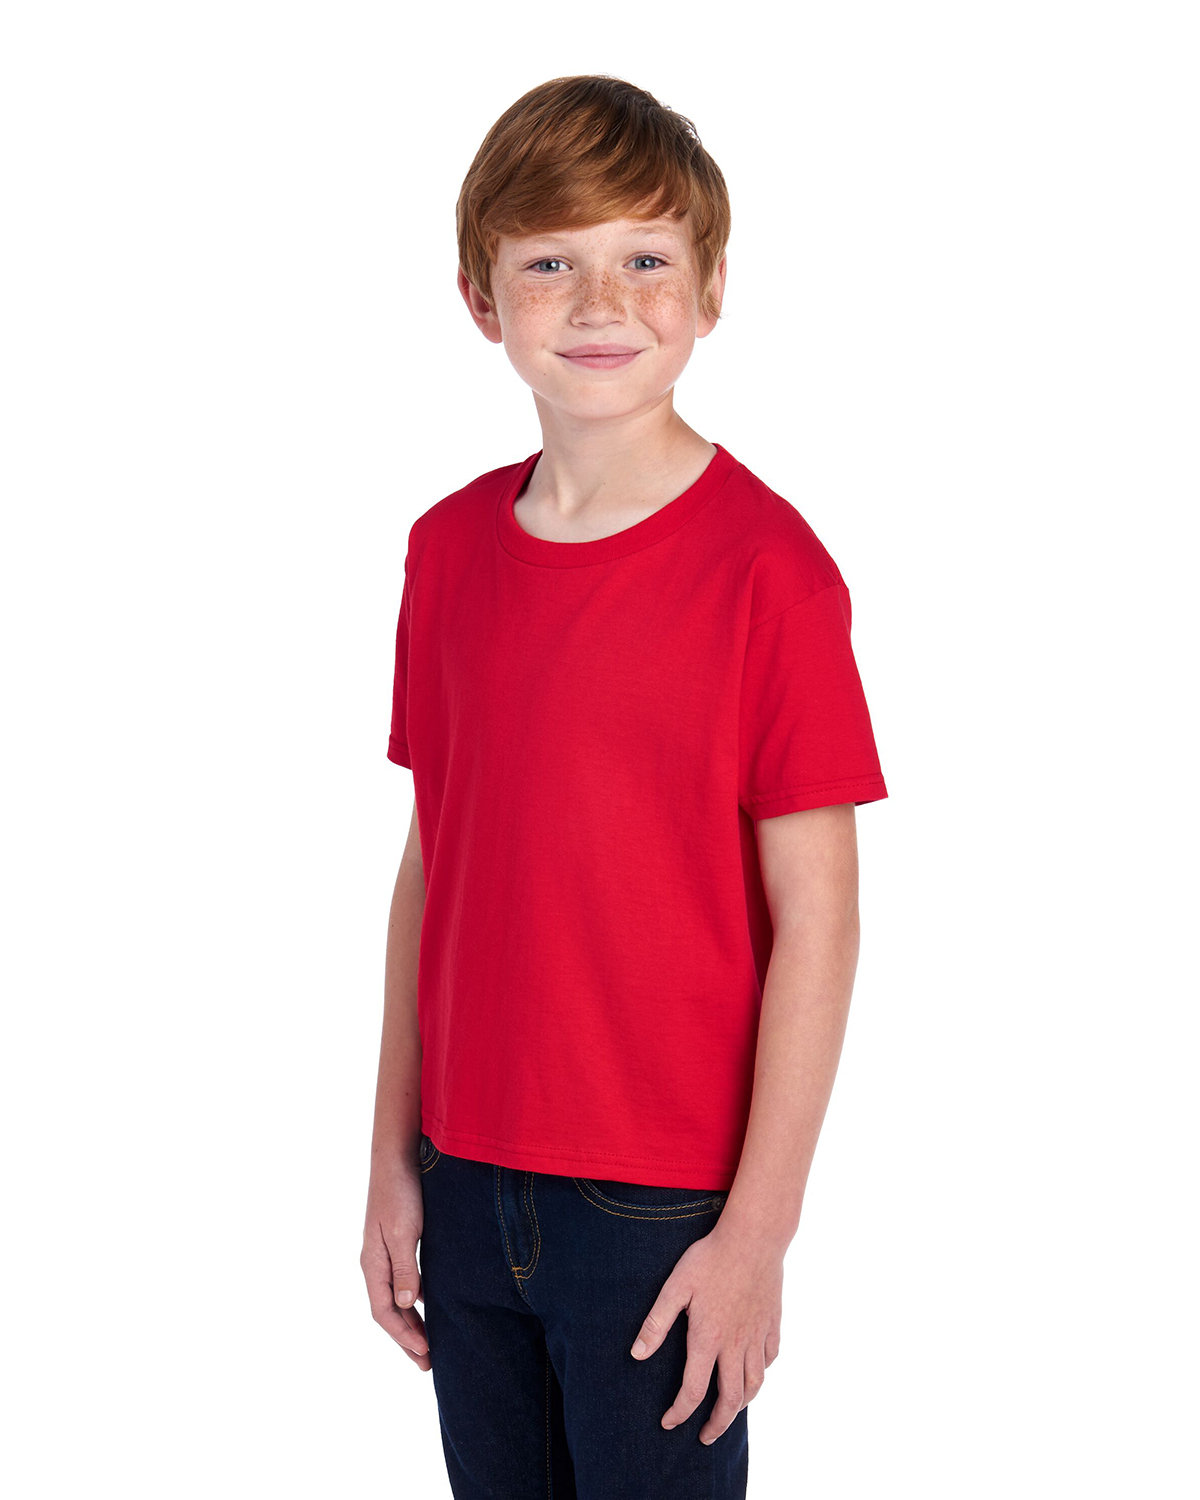 Fruit of the Loom Youth Sofspun® T-Shirt | alphabroder